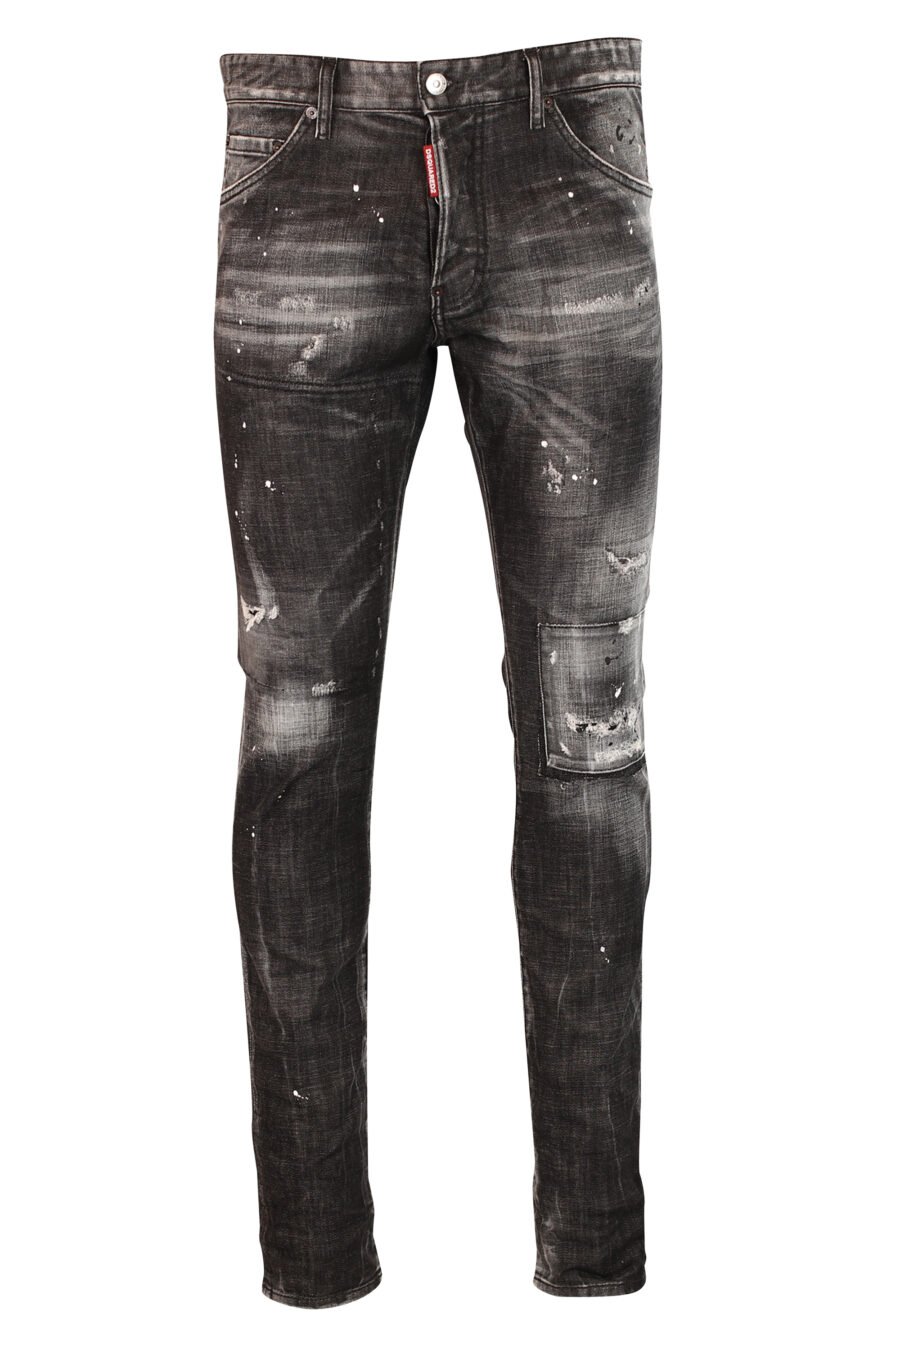 Cool guy jean trousers black semi frayed and ripped - 8052134953105